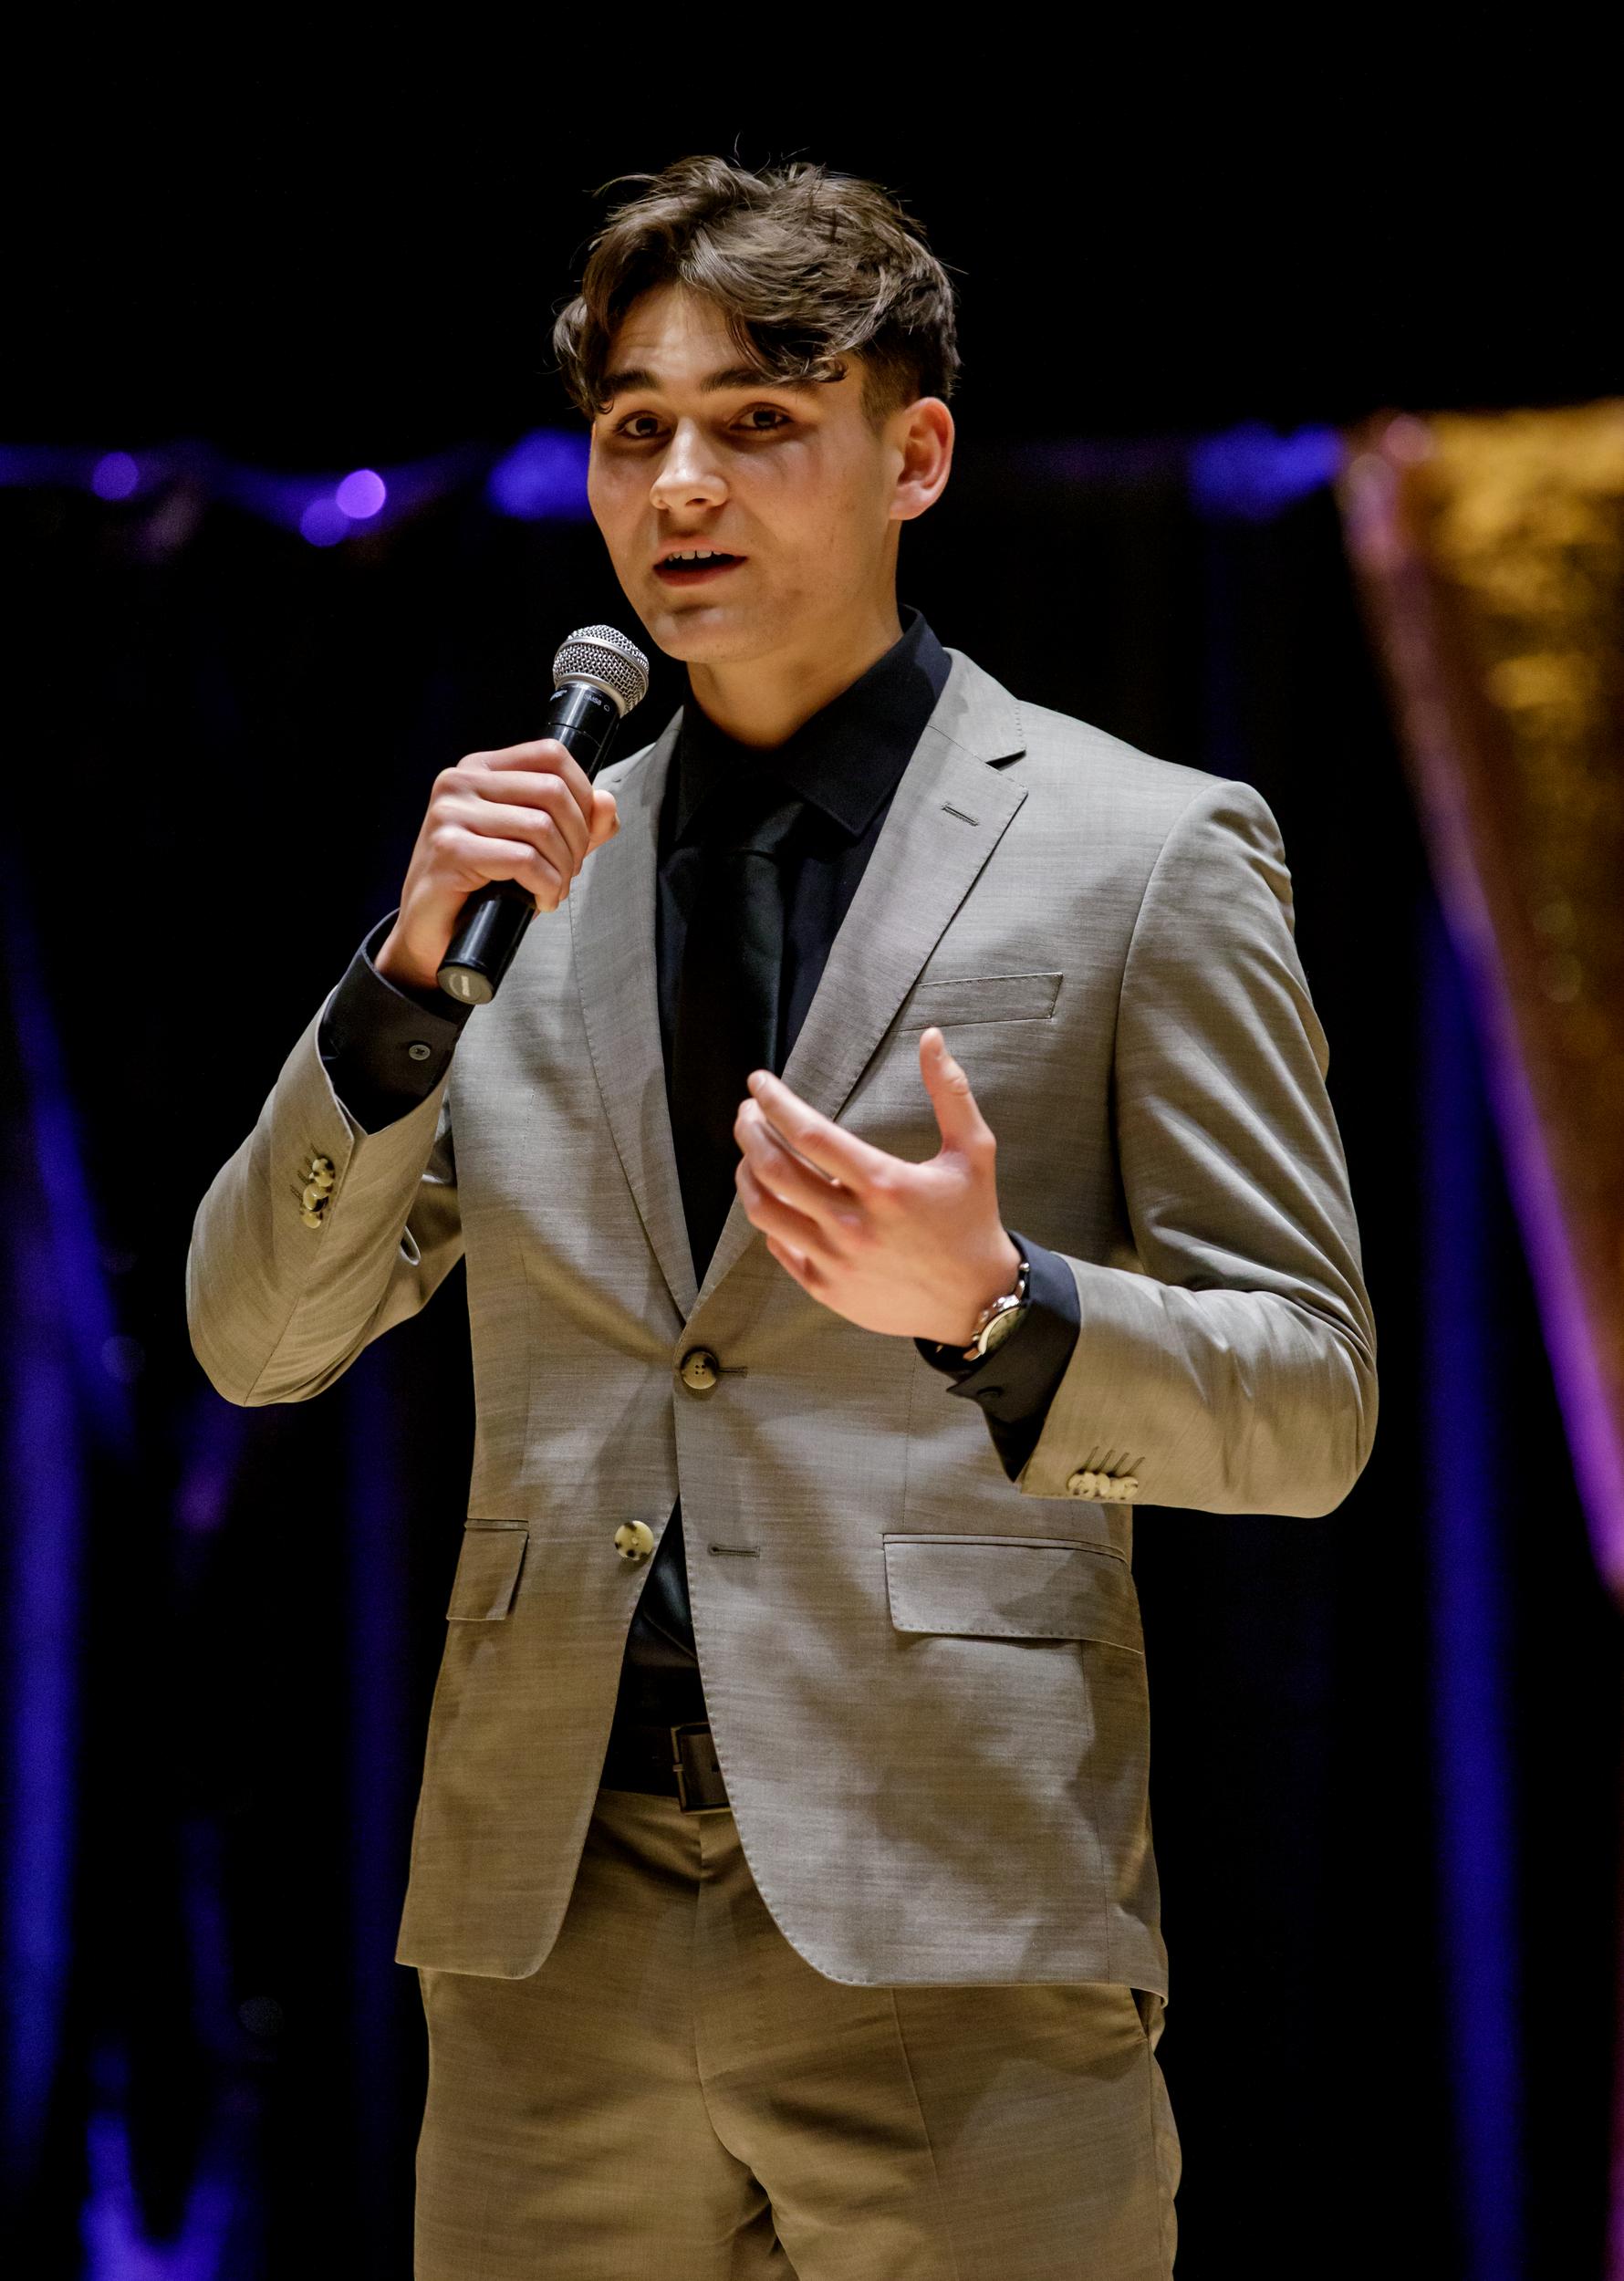 A young man speaks using a microphone to an audience